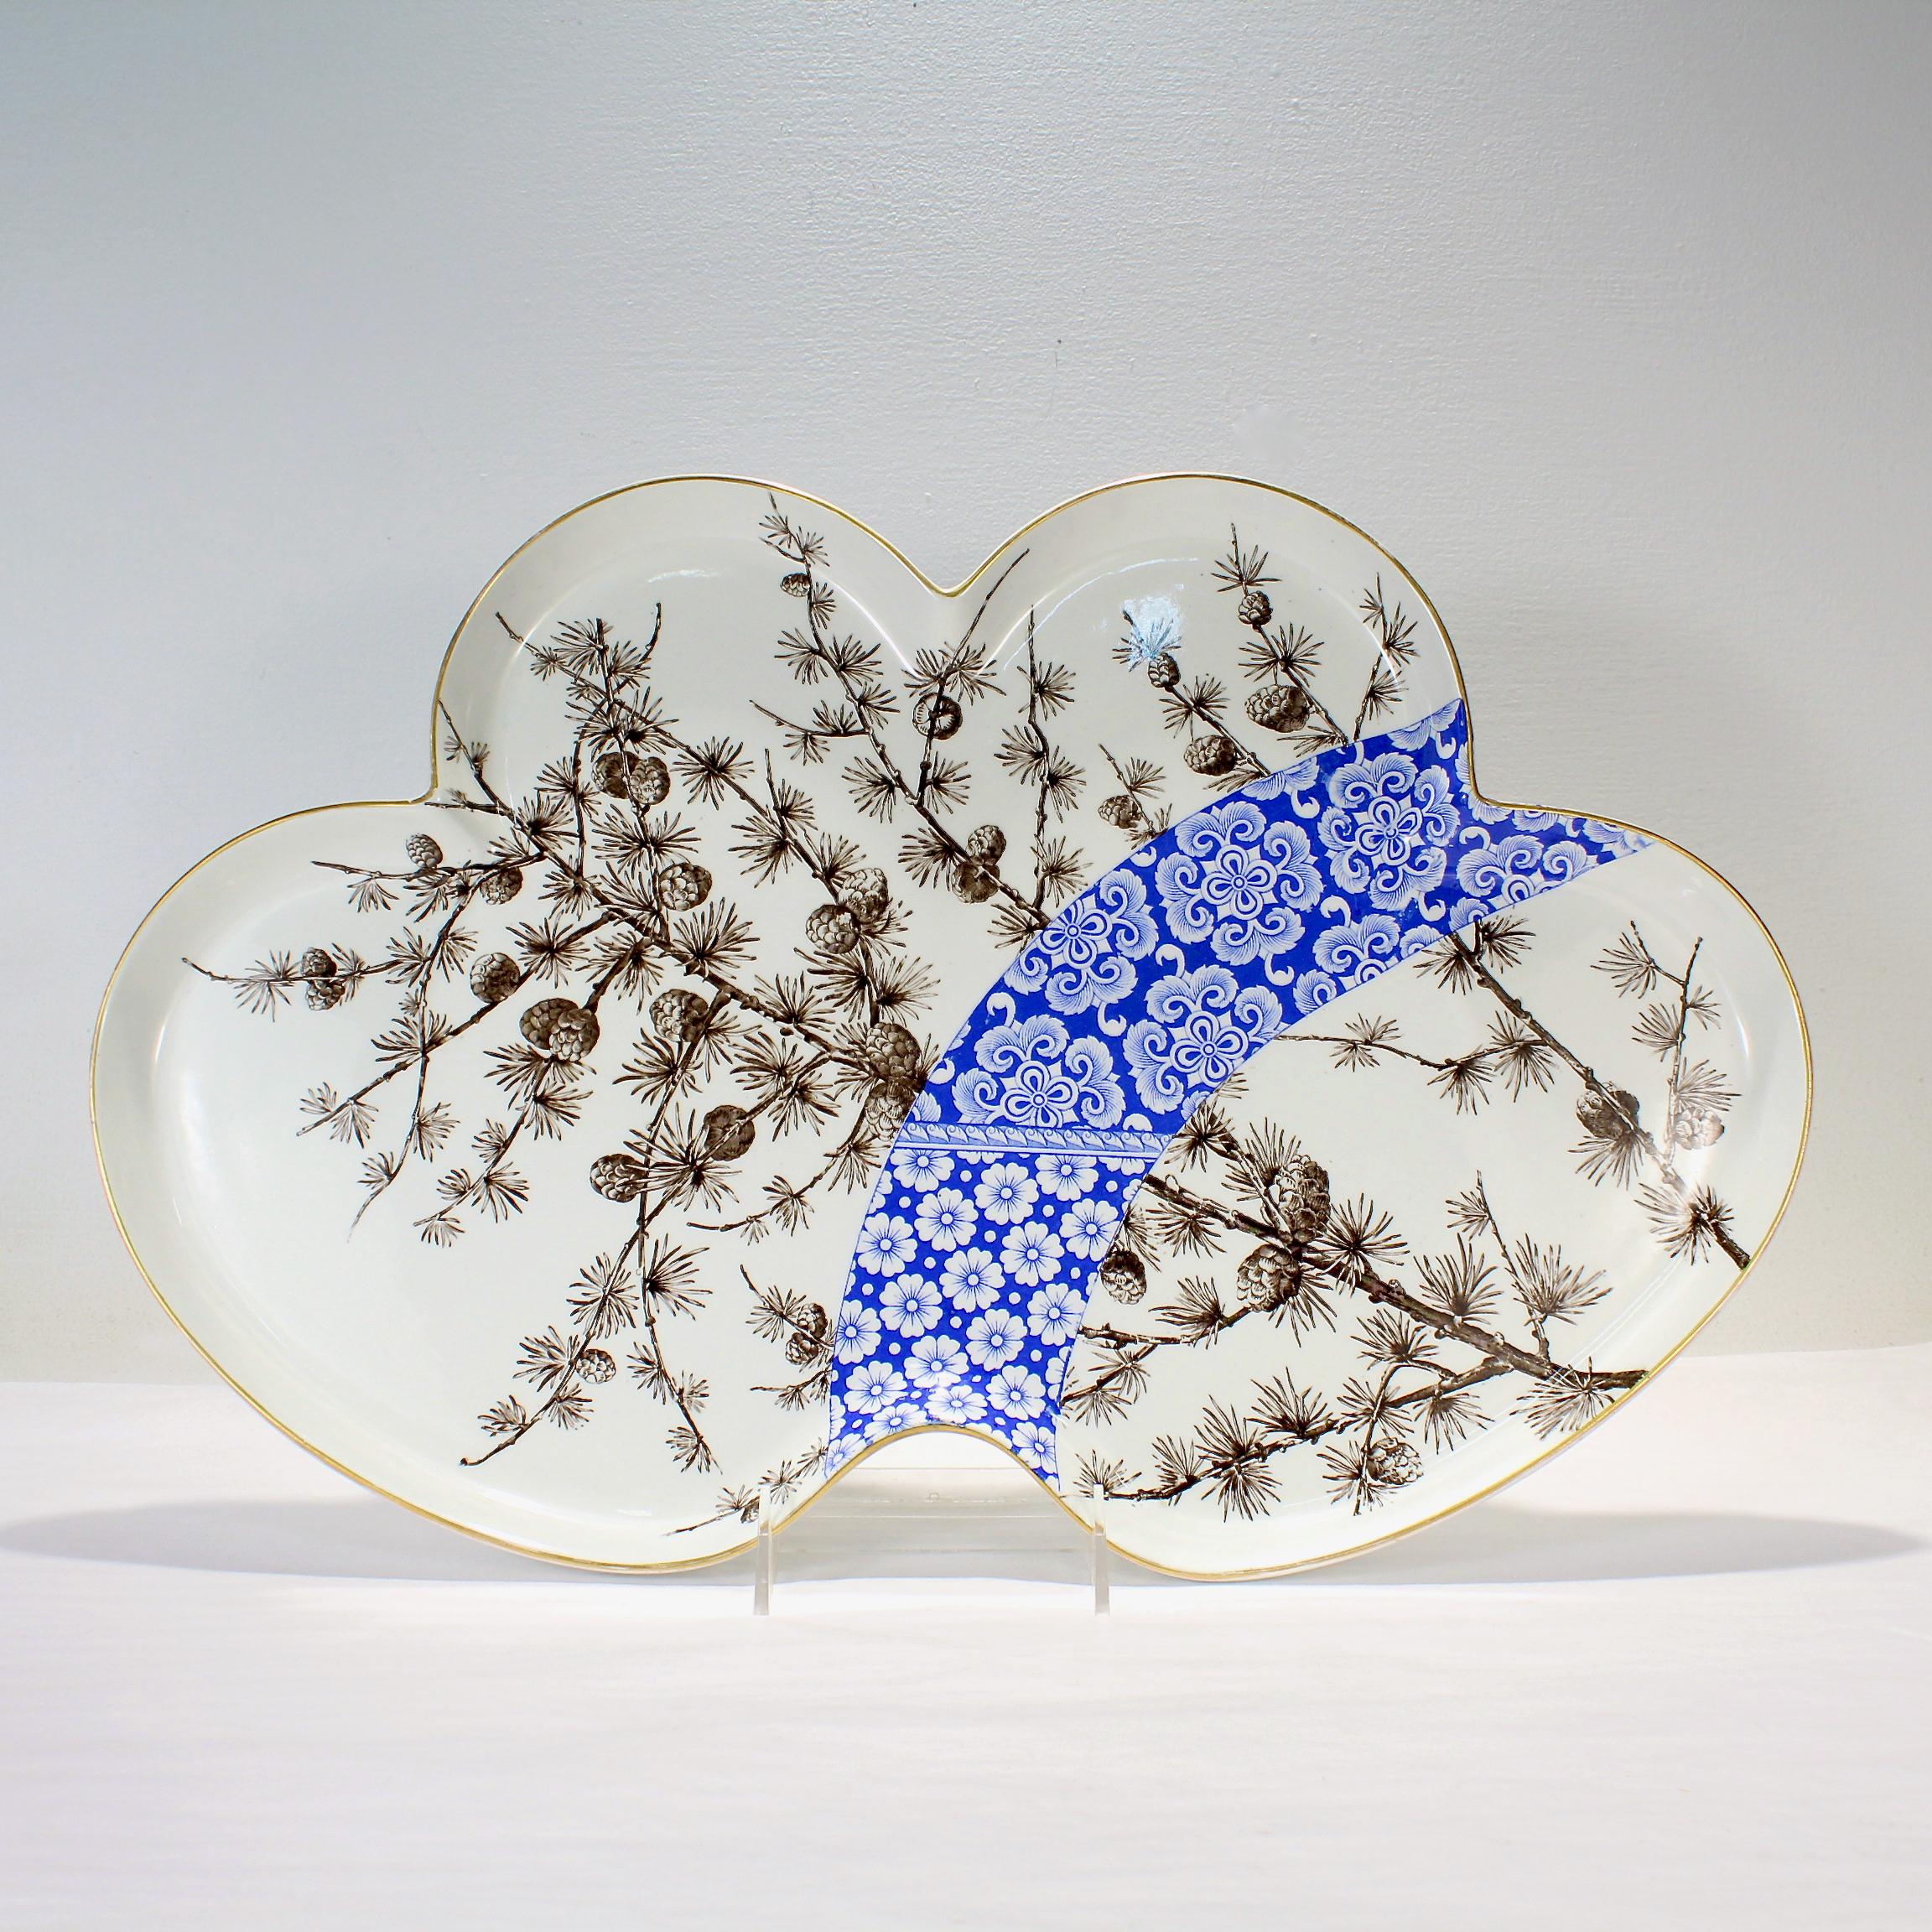 A fine antique porcelain tray.

By Royal Worcester.

Transfer decorated throughout with black and white pinecones & pine needles which are bisected by a striking band of blue & white floral motifs. 

The tray's rim is gilded.

Simply a